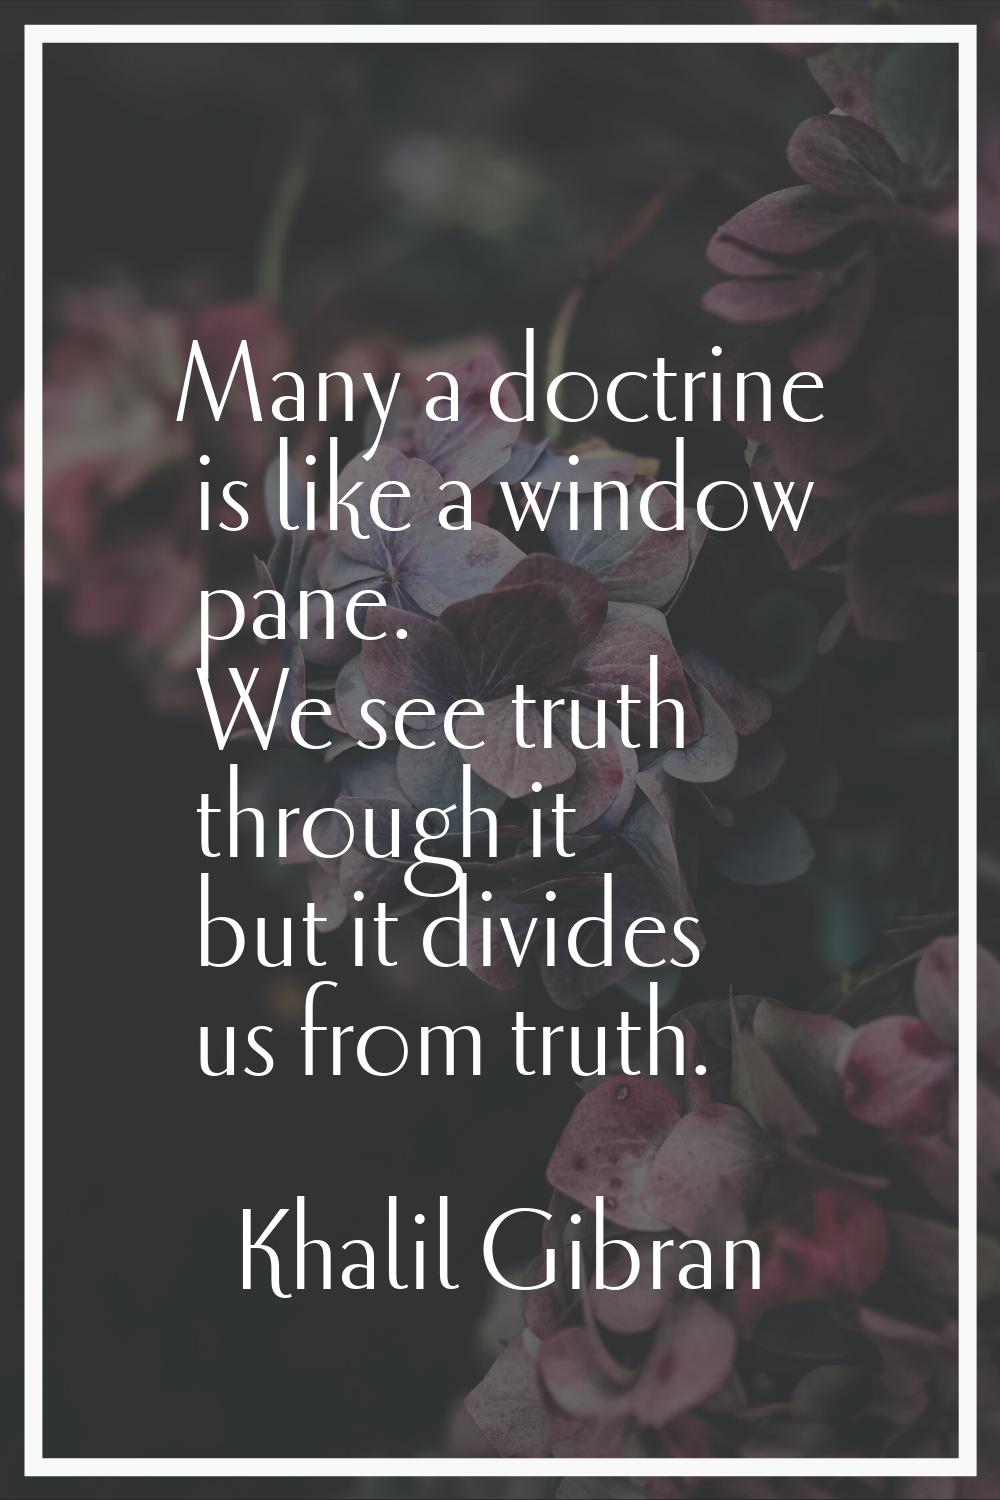 Many a doctrine is like a window pane. We see truth through it but it divides us from truth.